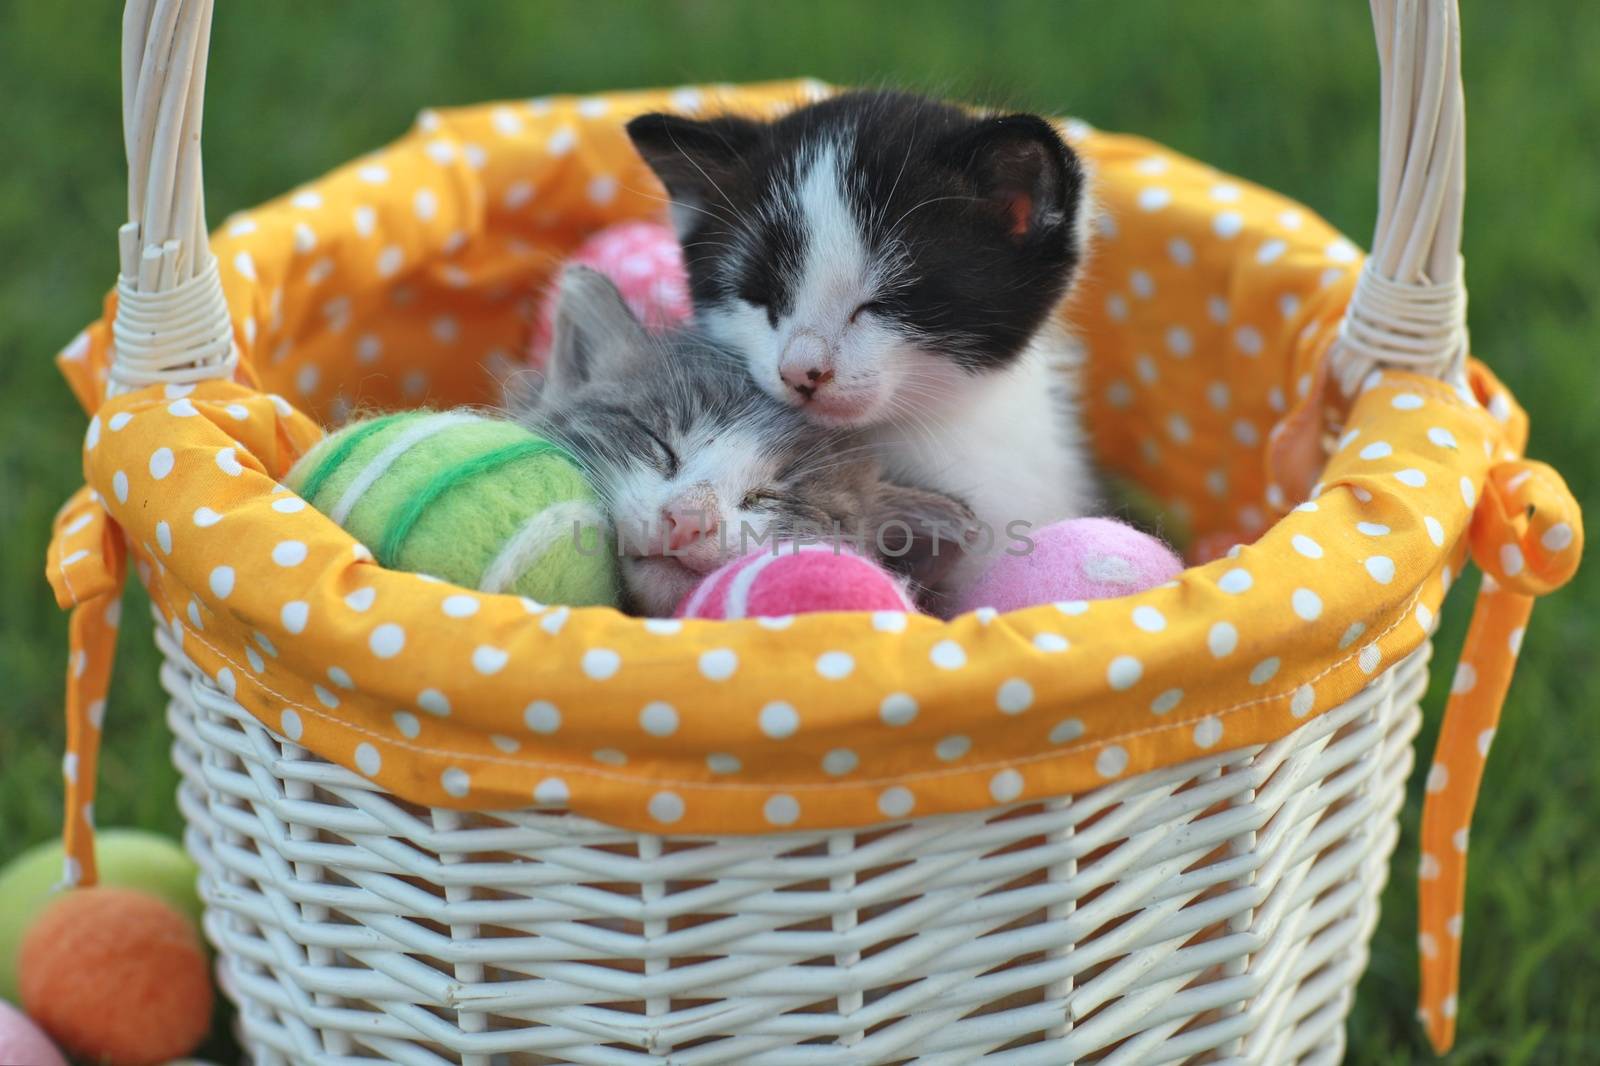 Kittens in a Holiday Easter Basket With Eggs